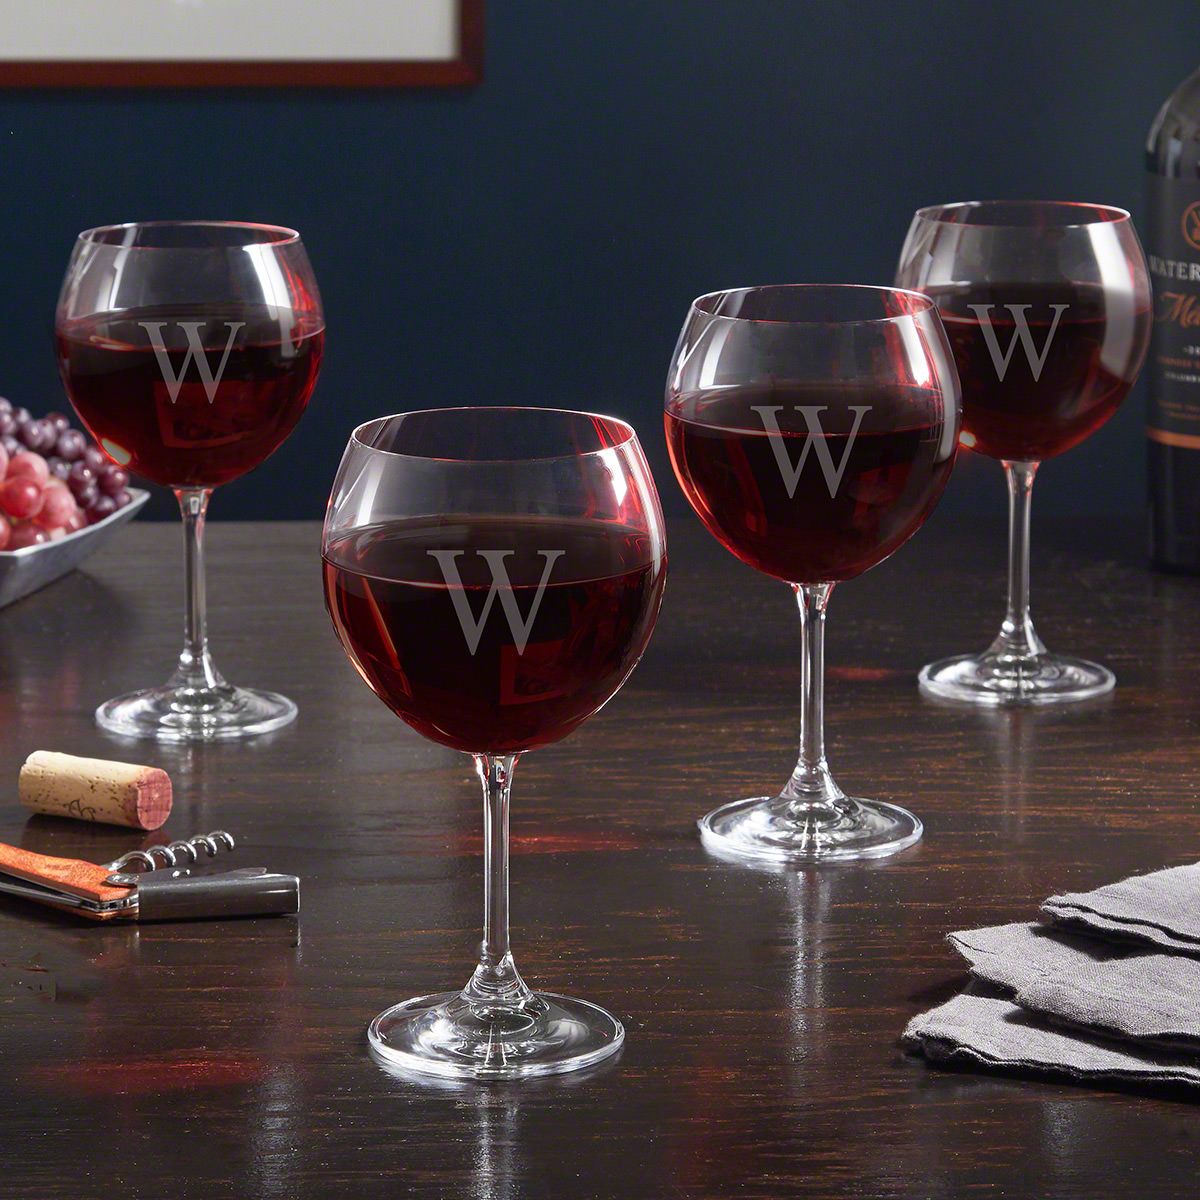 https://images.homewetbar.com/media/catalog/product/9/7/979-personalized-red-wine-glasses-set-of-four-primary-up-9-20.jpg?store=default&image-type=image